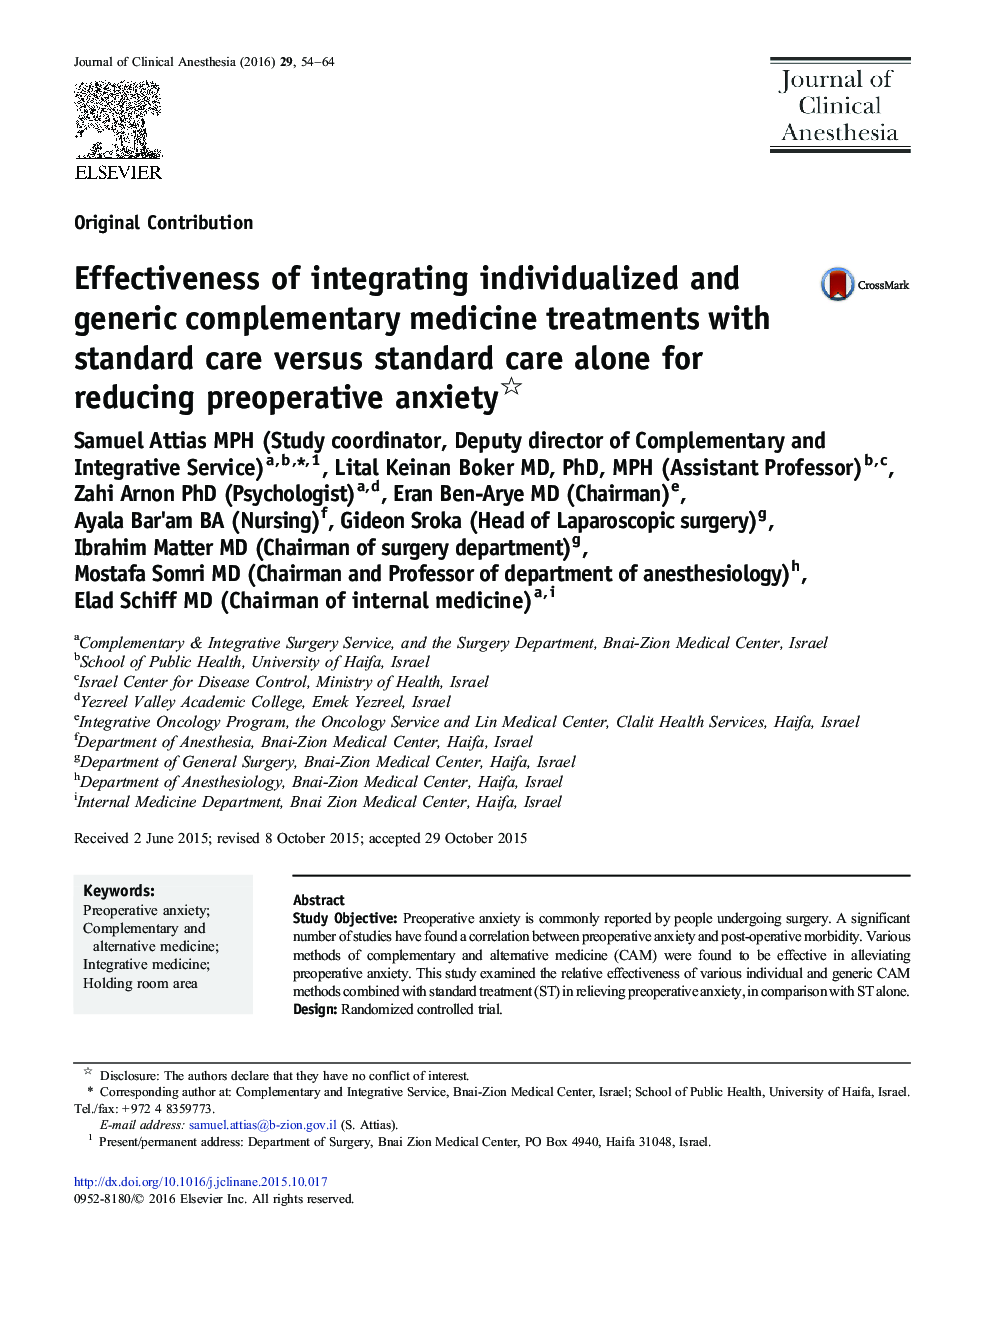 Original ContributionEffectiveness of integrating individualized and generic complementary medicine treatments with standard care versus standard care alone for reducing preoperative anxiety